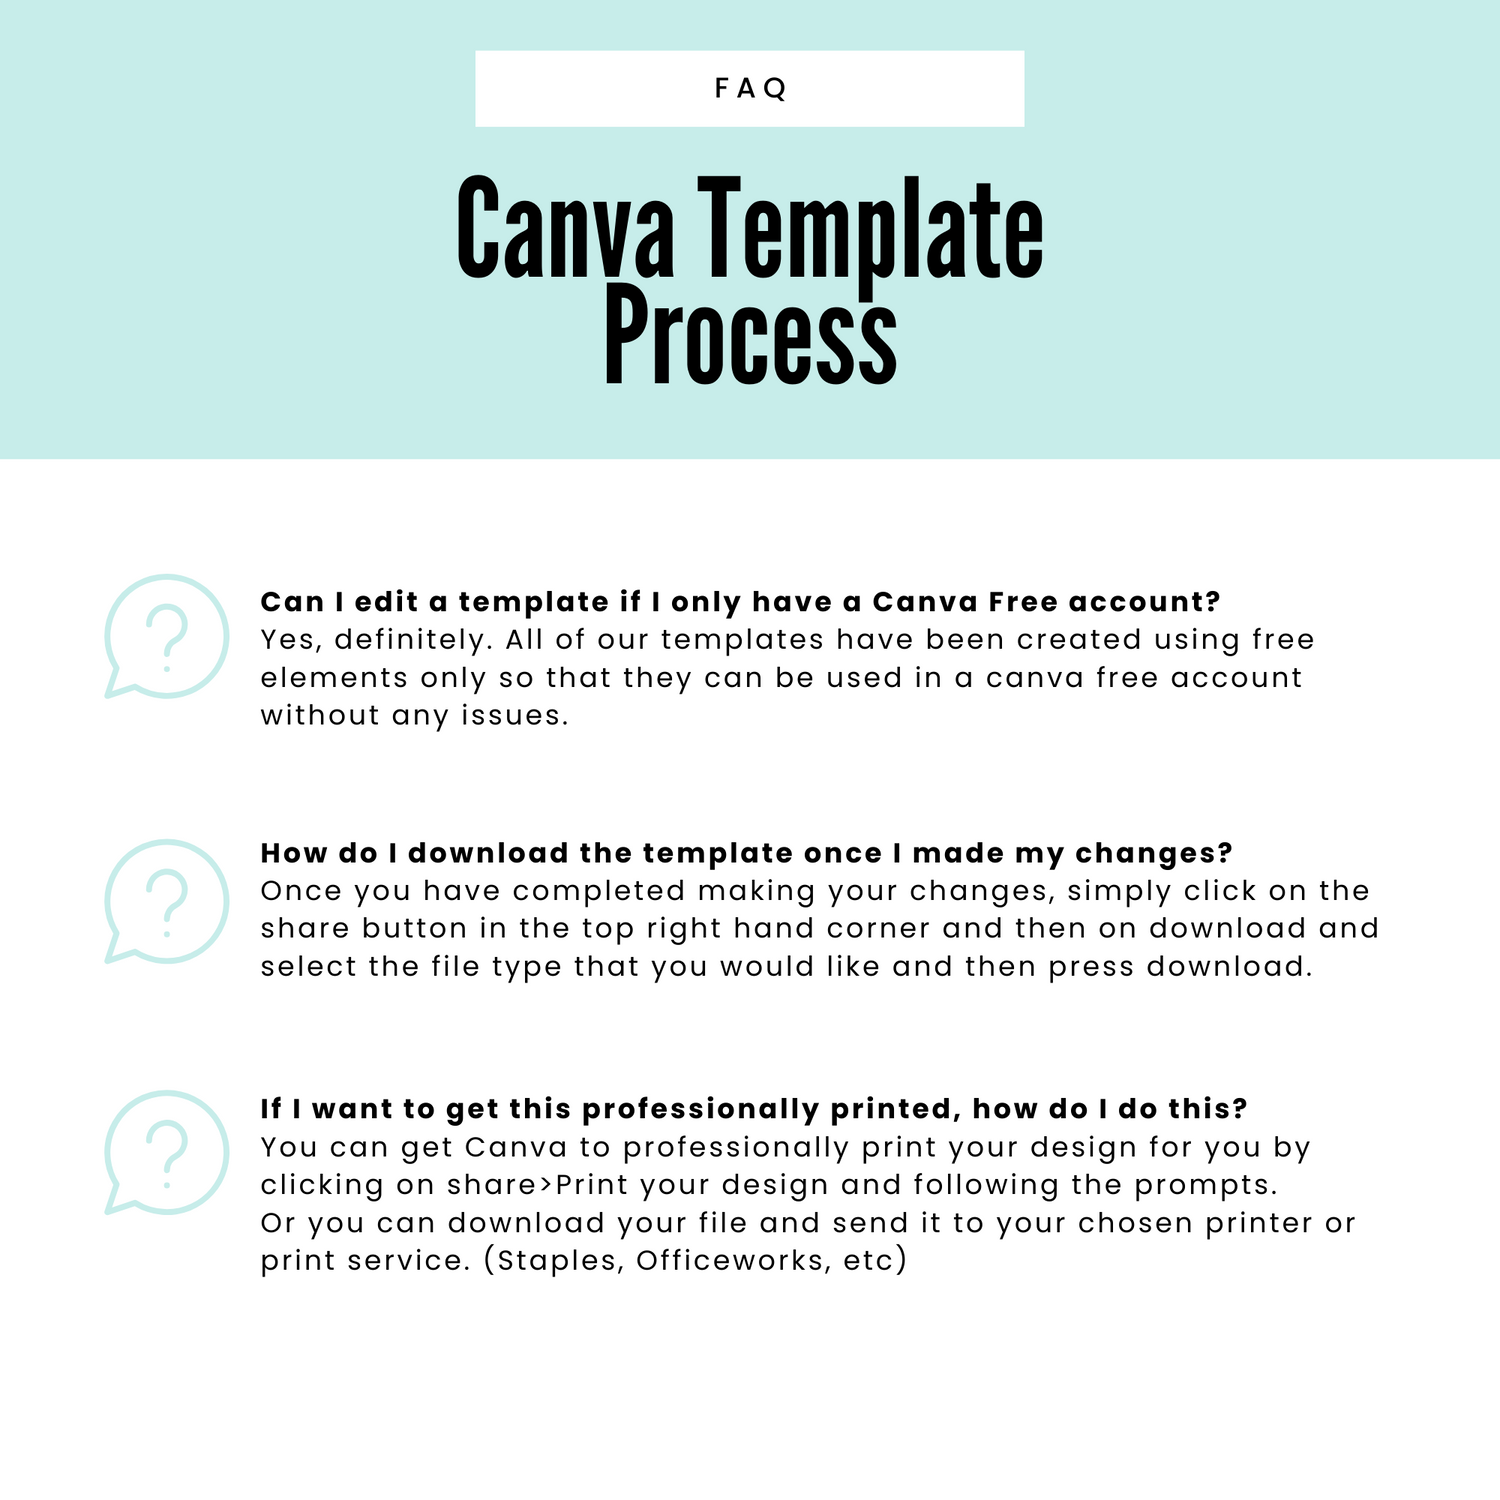 frequently asked questions about editing  teamplate in canva